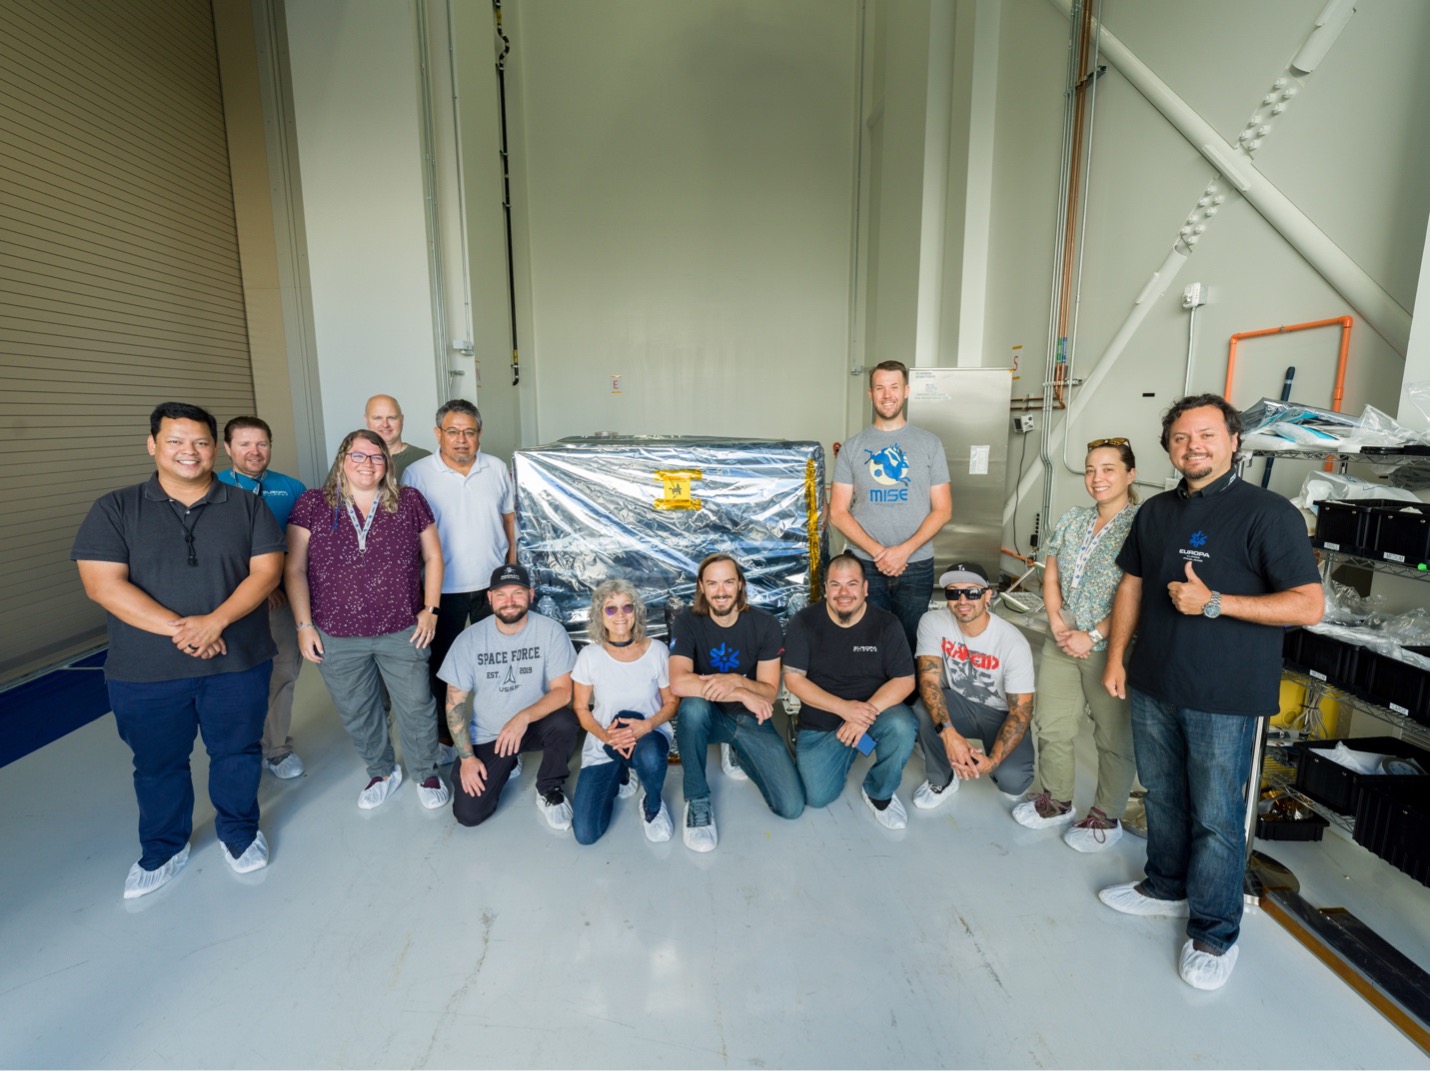 Europa Clipper’s Mapping Imaging Spectrometer for Europa, called MISE, was delivered to NASA’s Jet Propulsion Laboratory (JPL) in July 2023. Seen in this image are some of the engineers and technicians from JPL who built and tested the instrument. Credit: NASA/JPL-Caltech